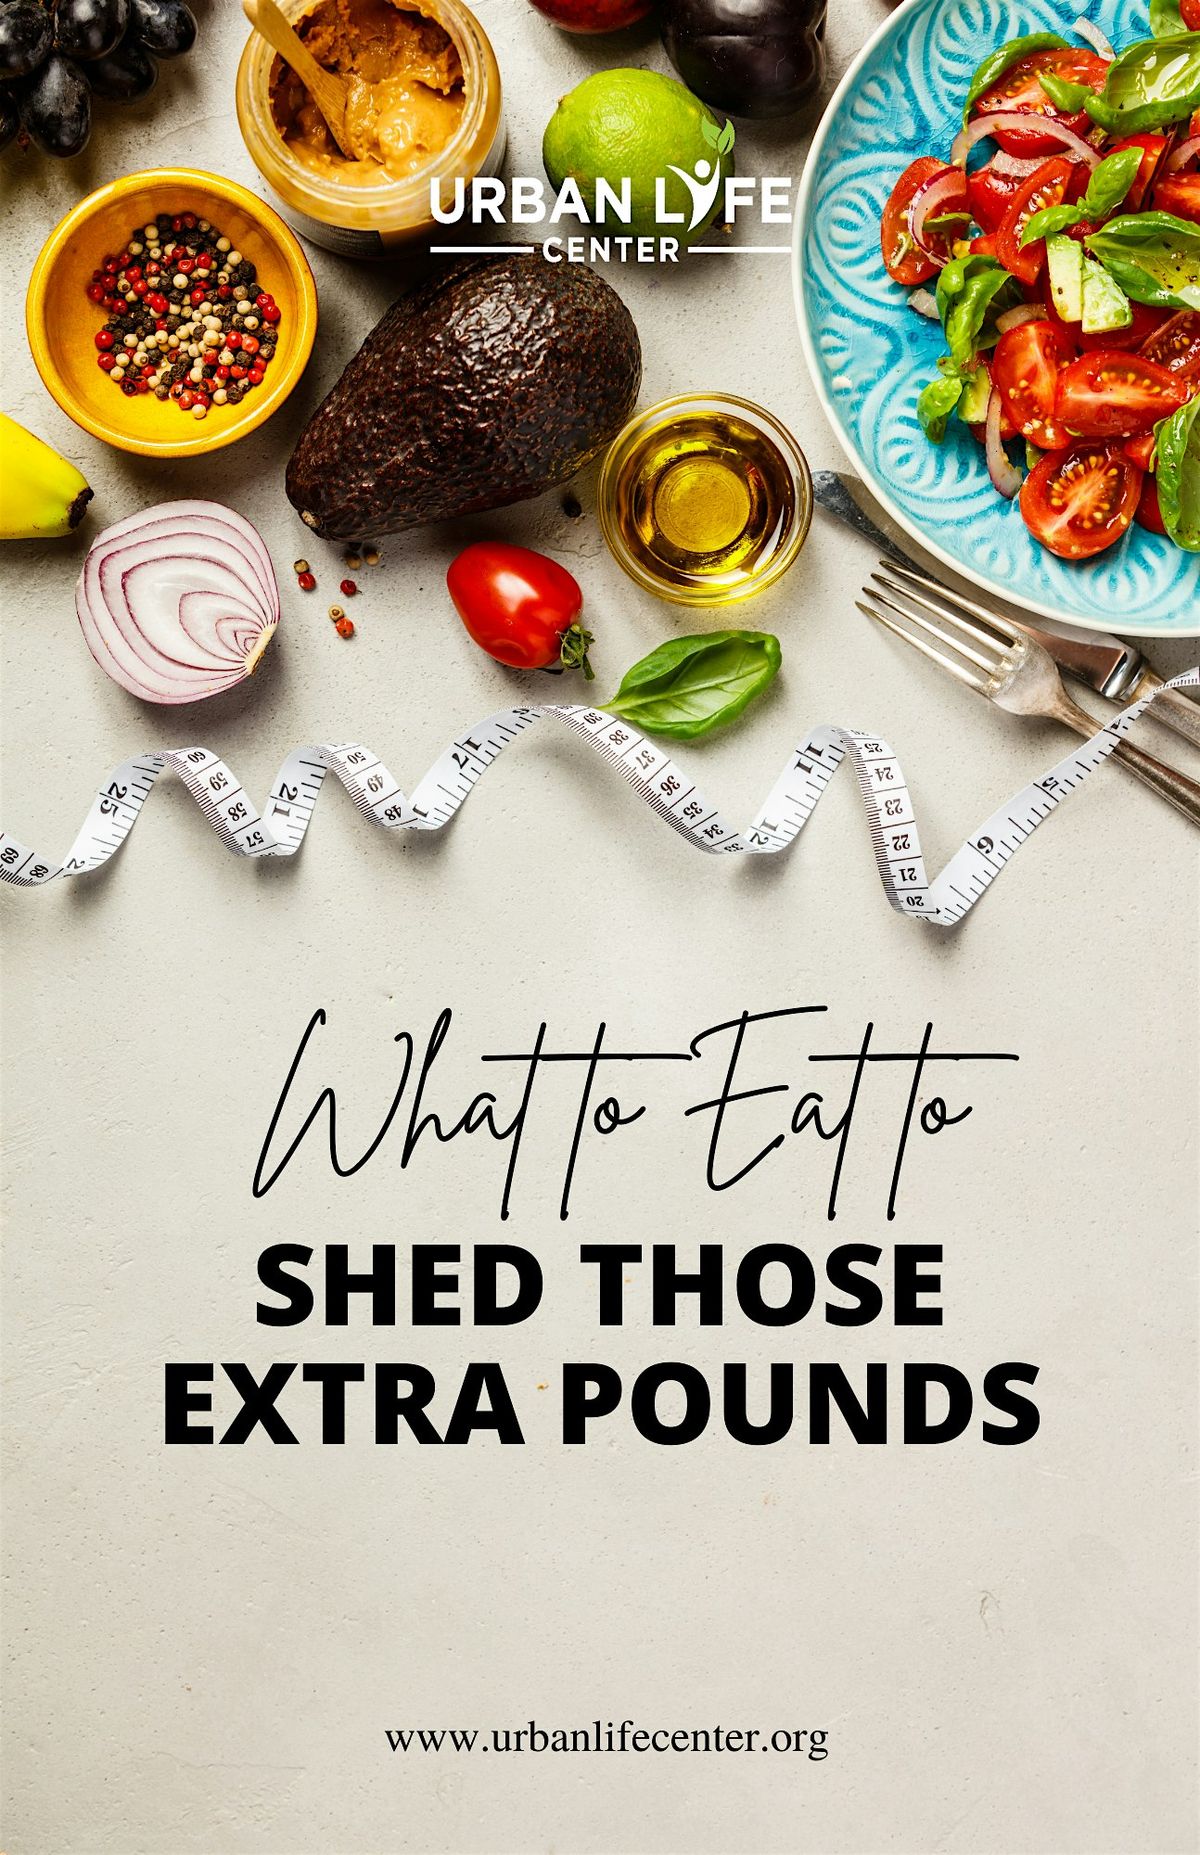 What to Eat to Shed Those Extra Pounds